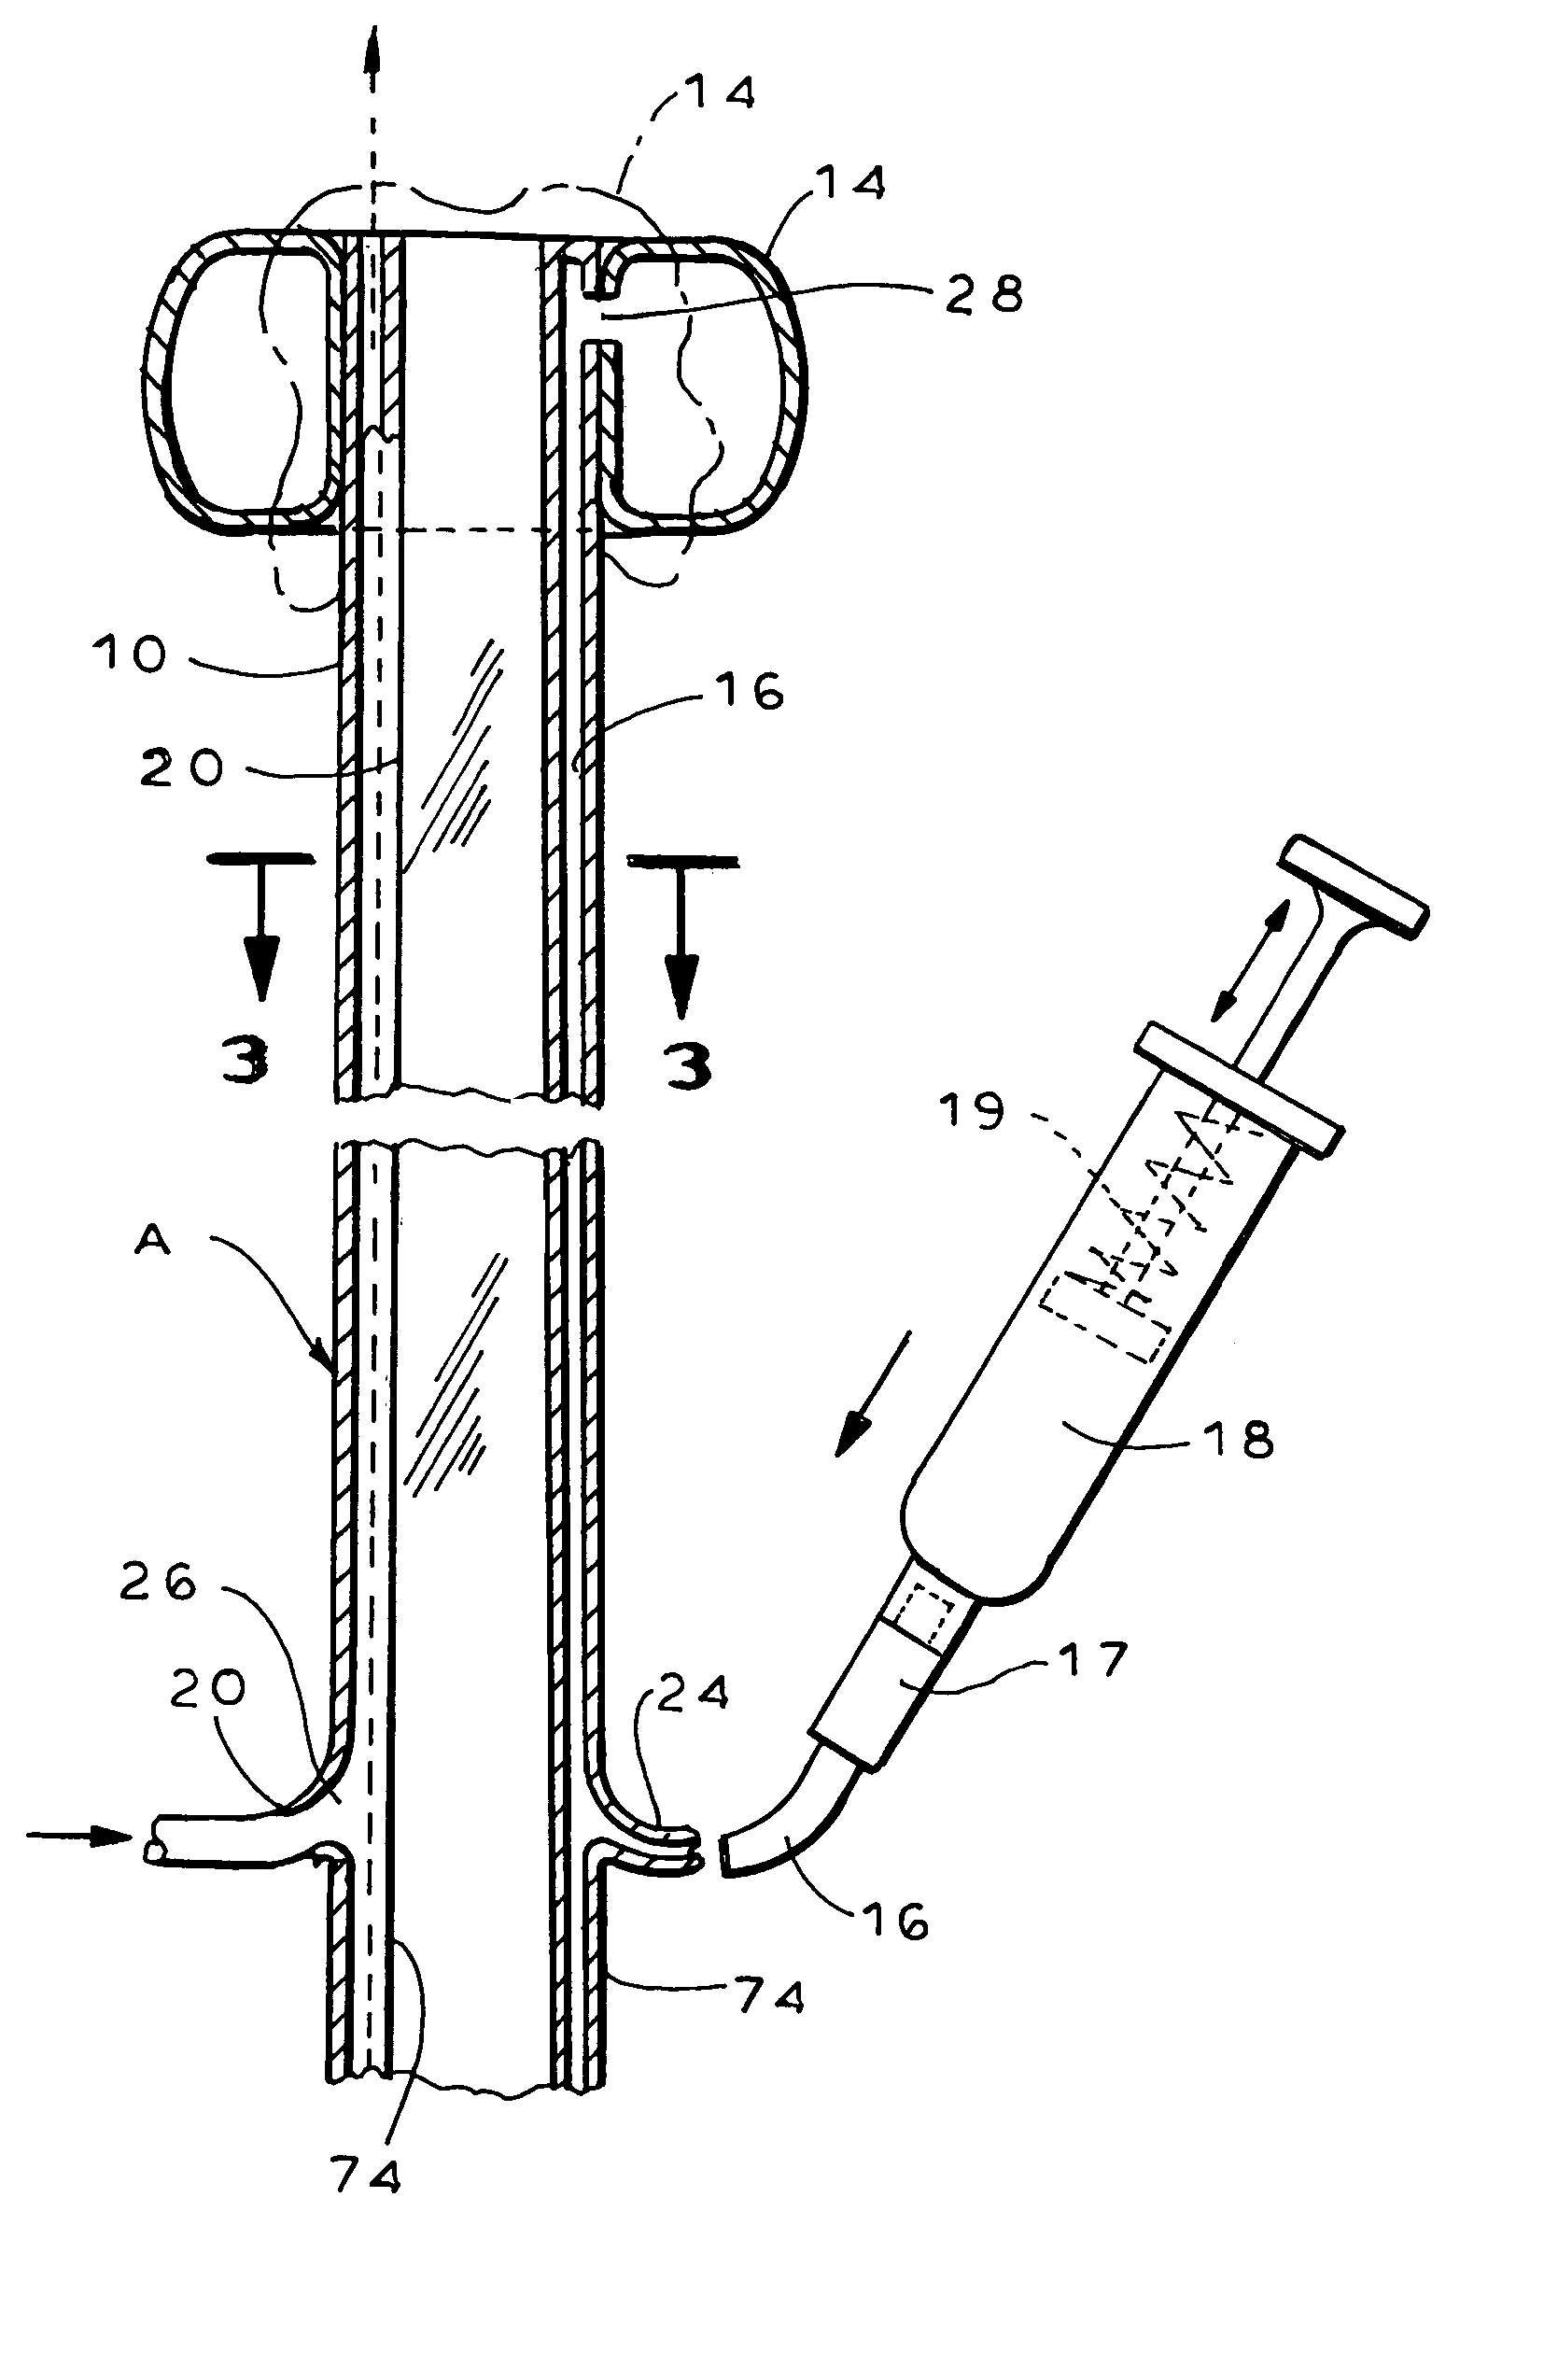 Fecal management appliance and method and apparatus for introducing same